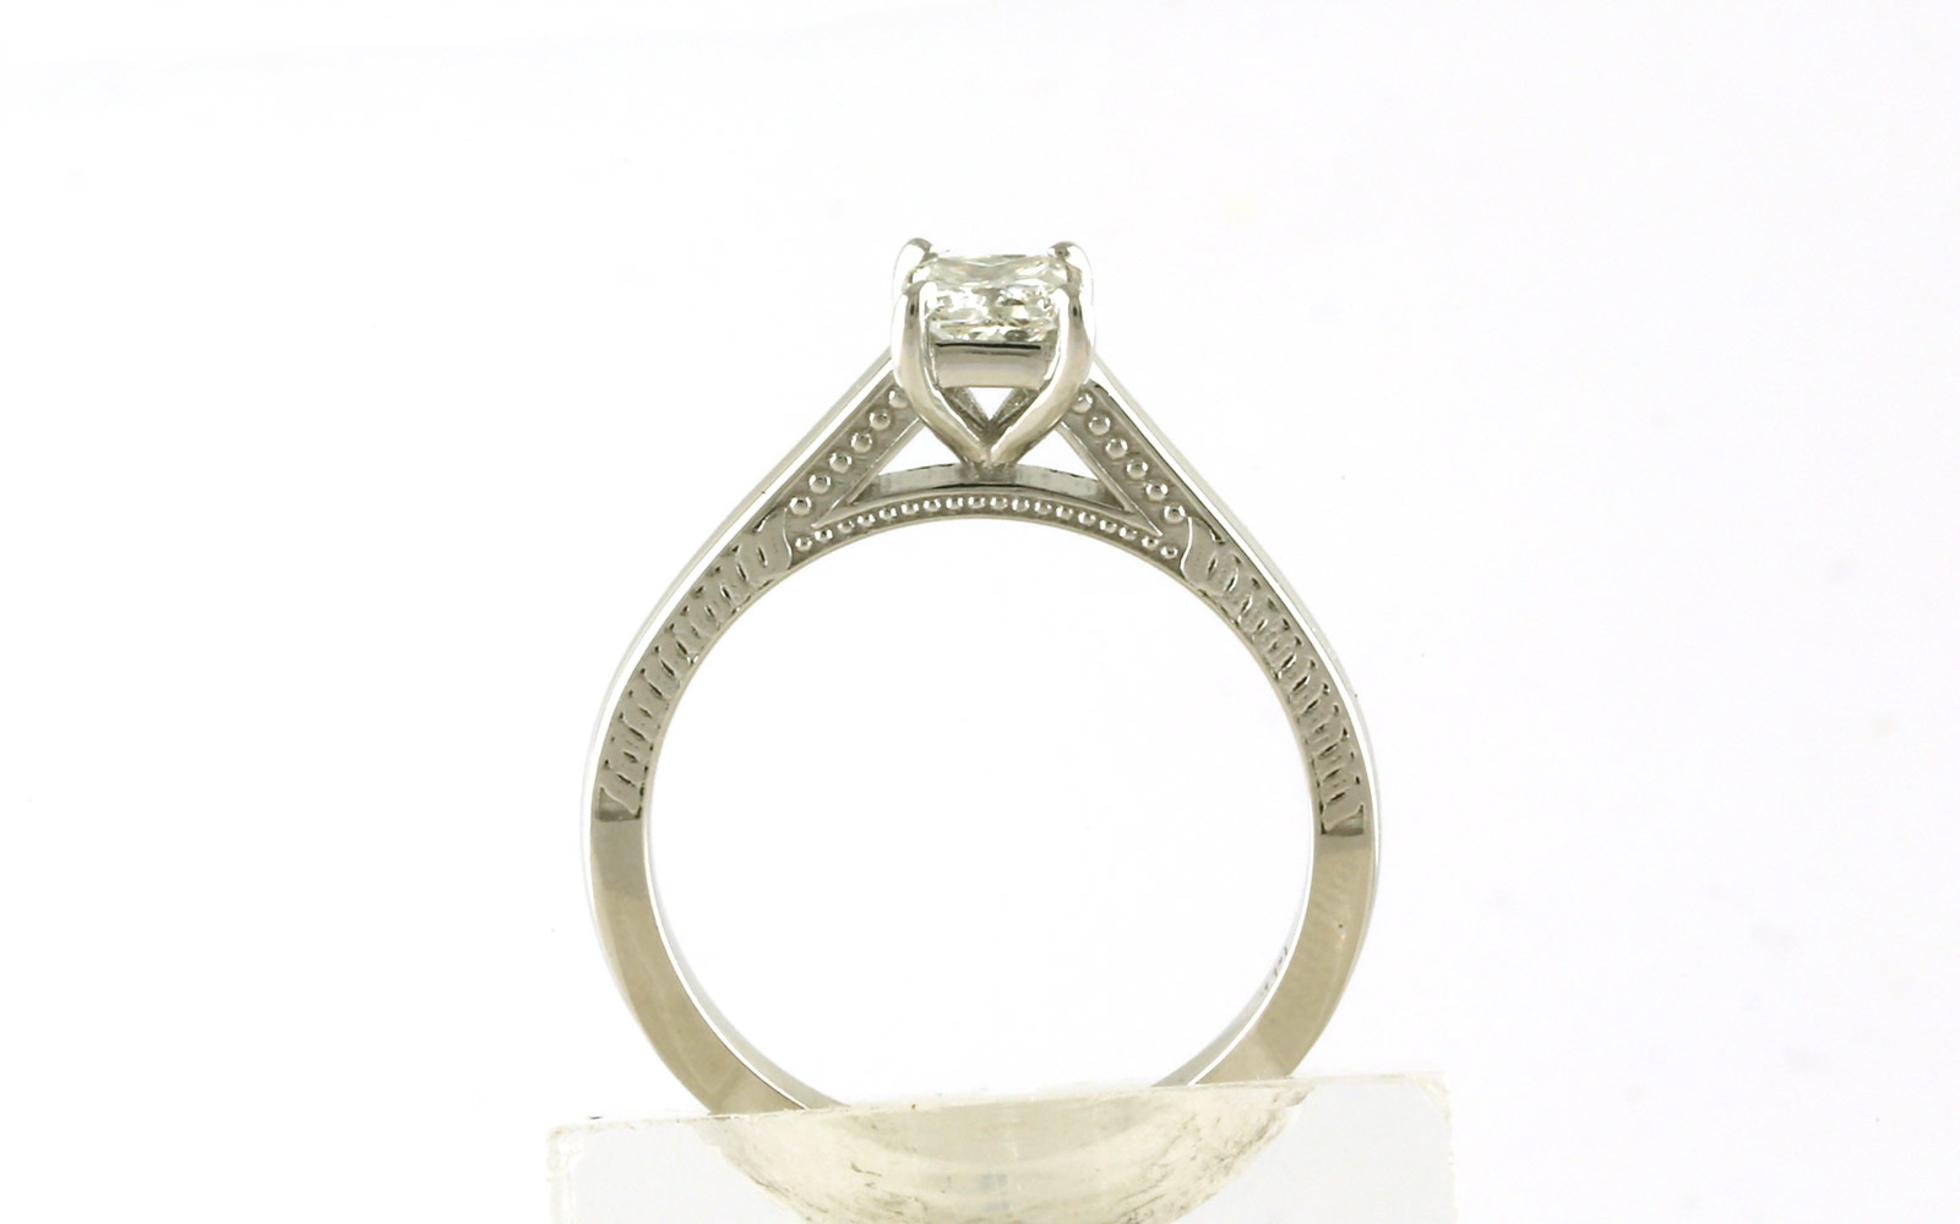 Solitaire-style Princess-cut Diamond Engagement Ring with Engraving Details on Side in White Gold (0.53cts)